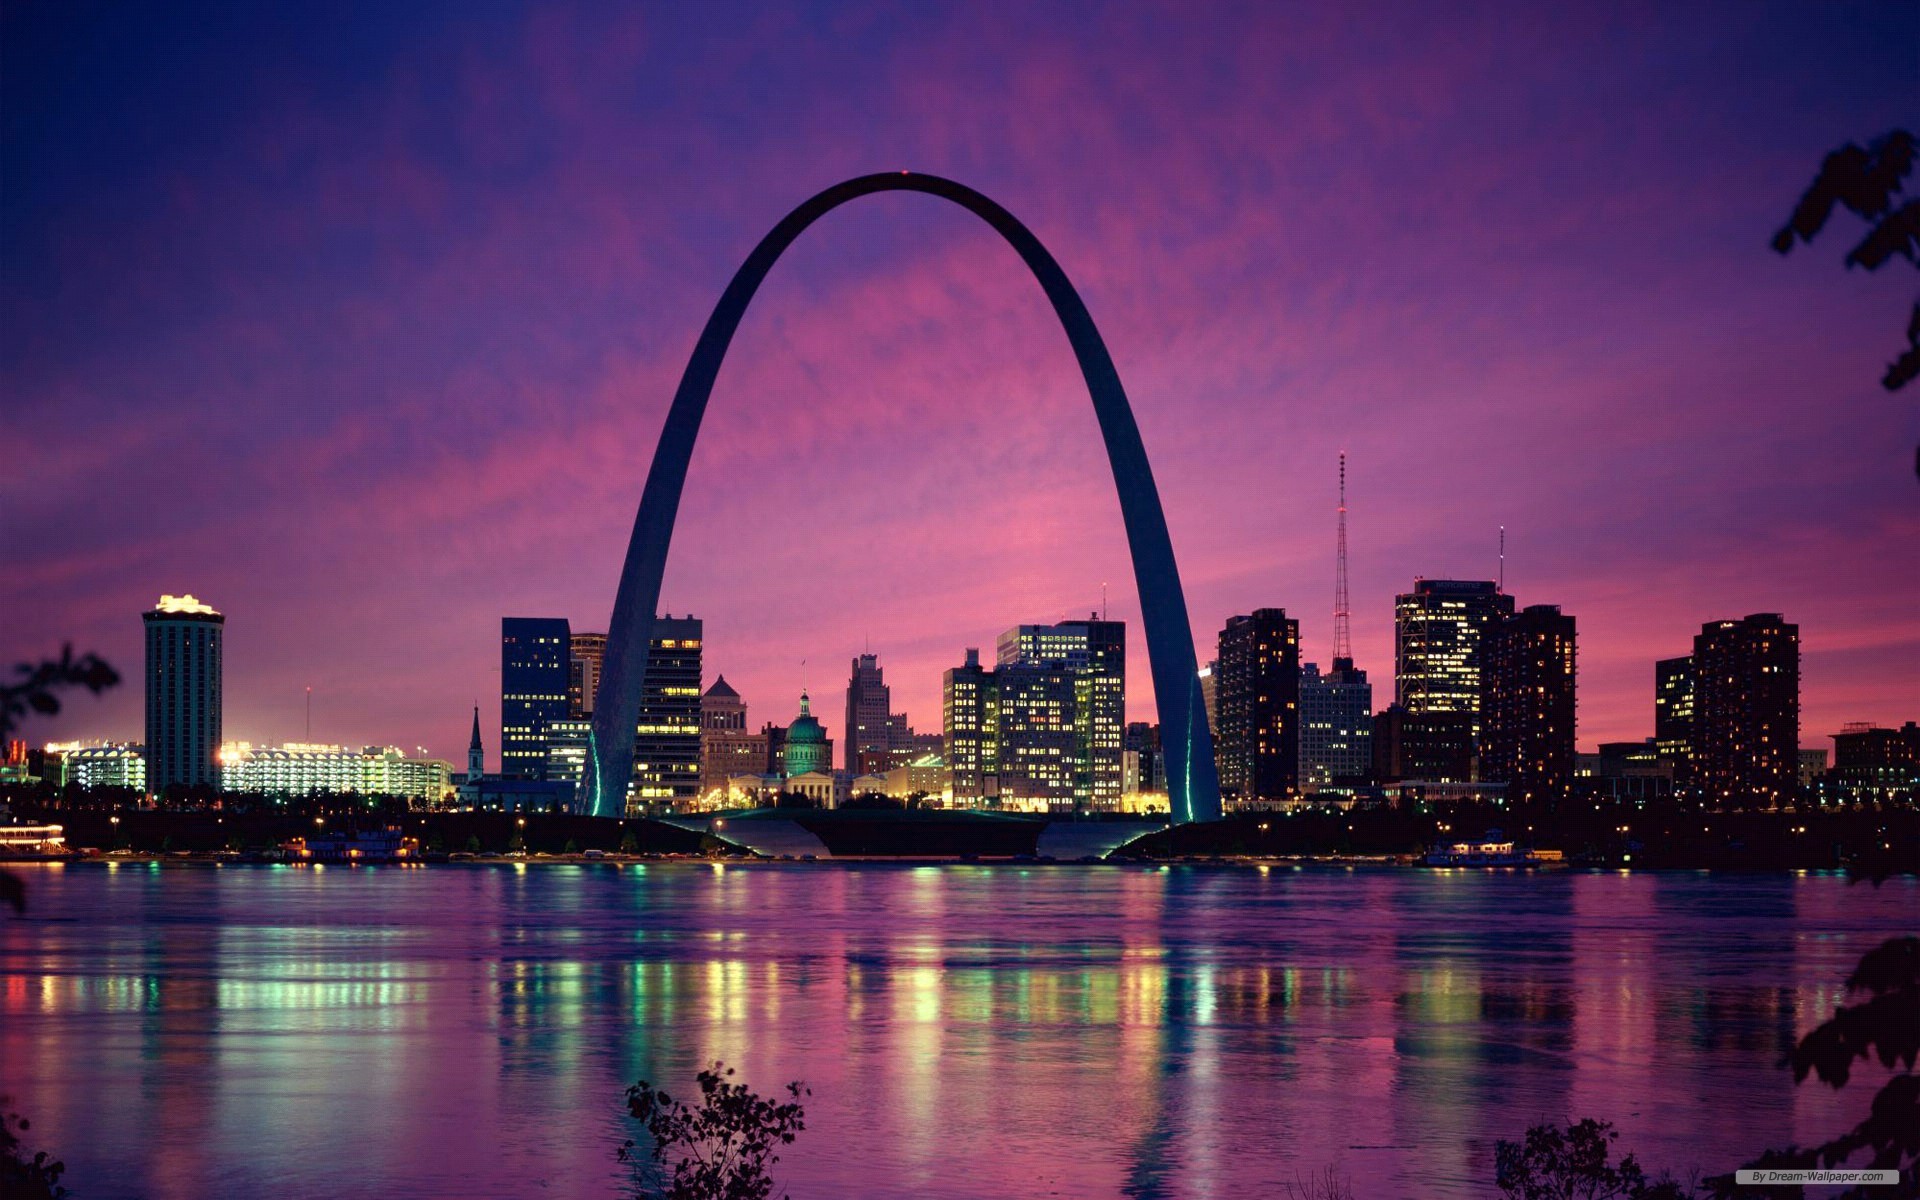 The Arch in St. Louis | A Pondering Mind